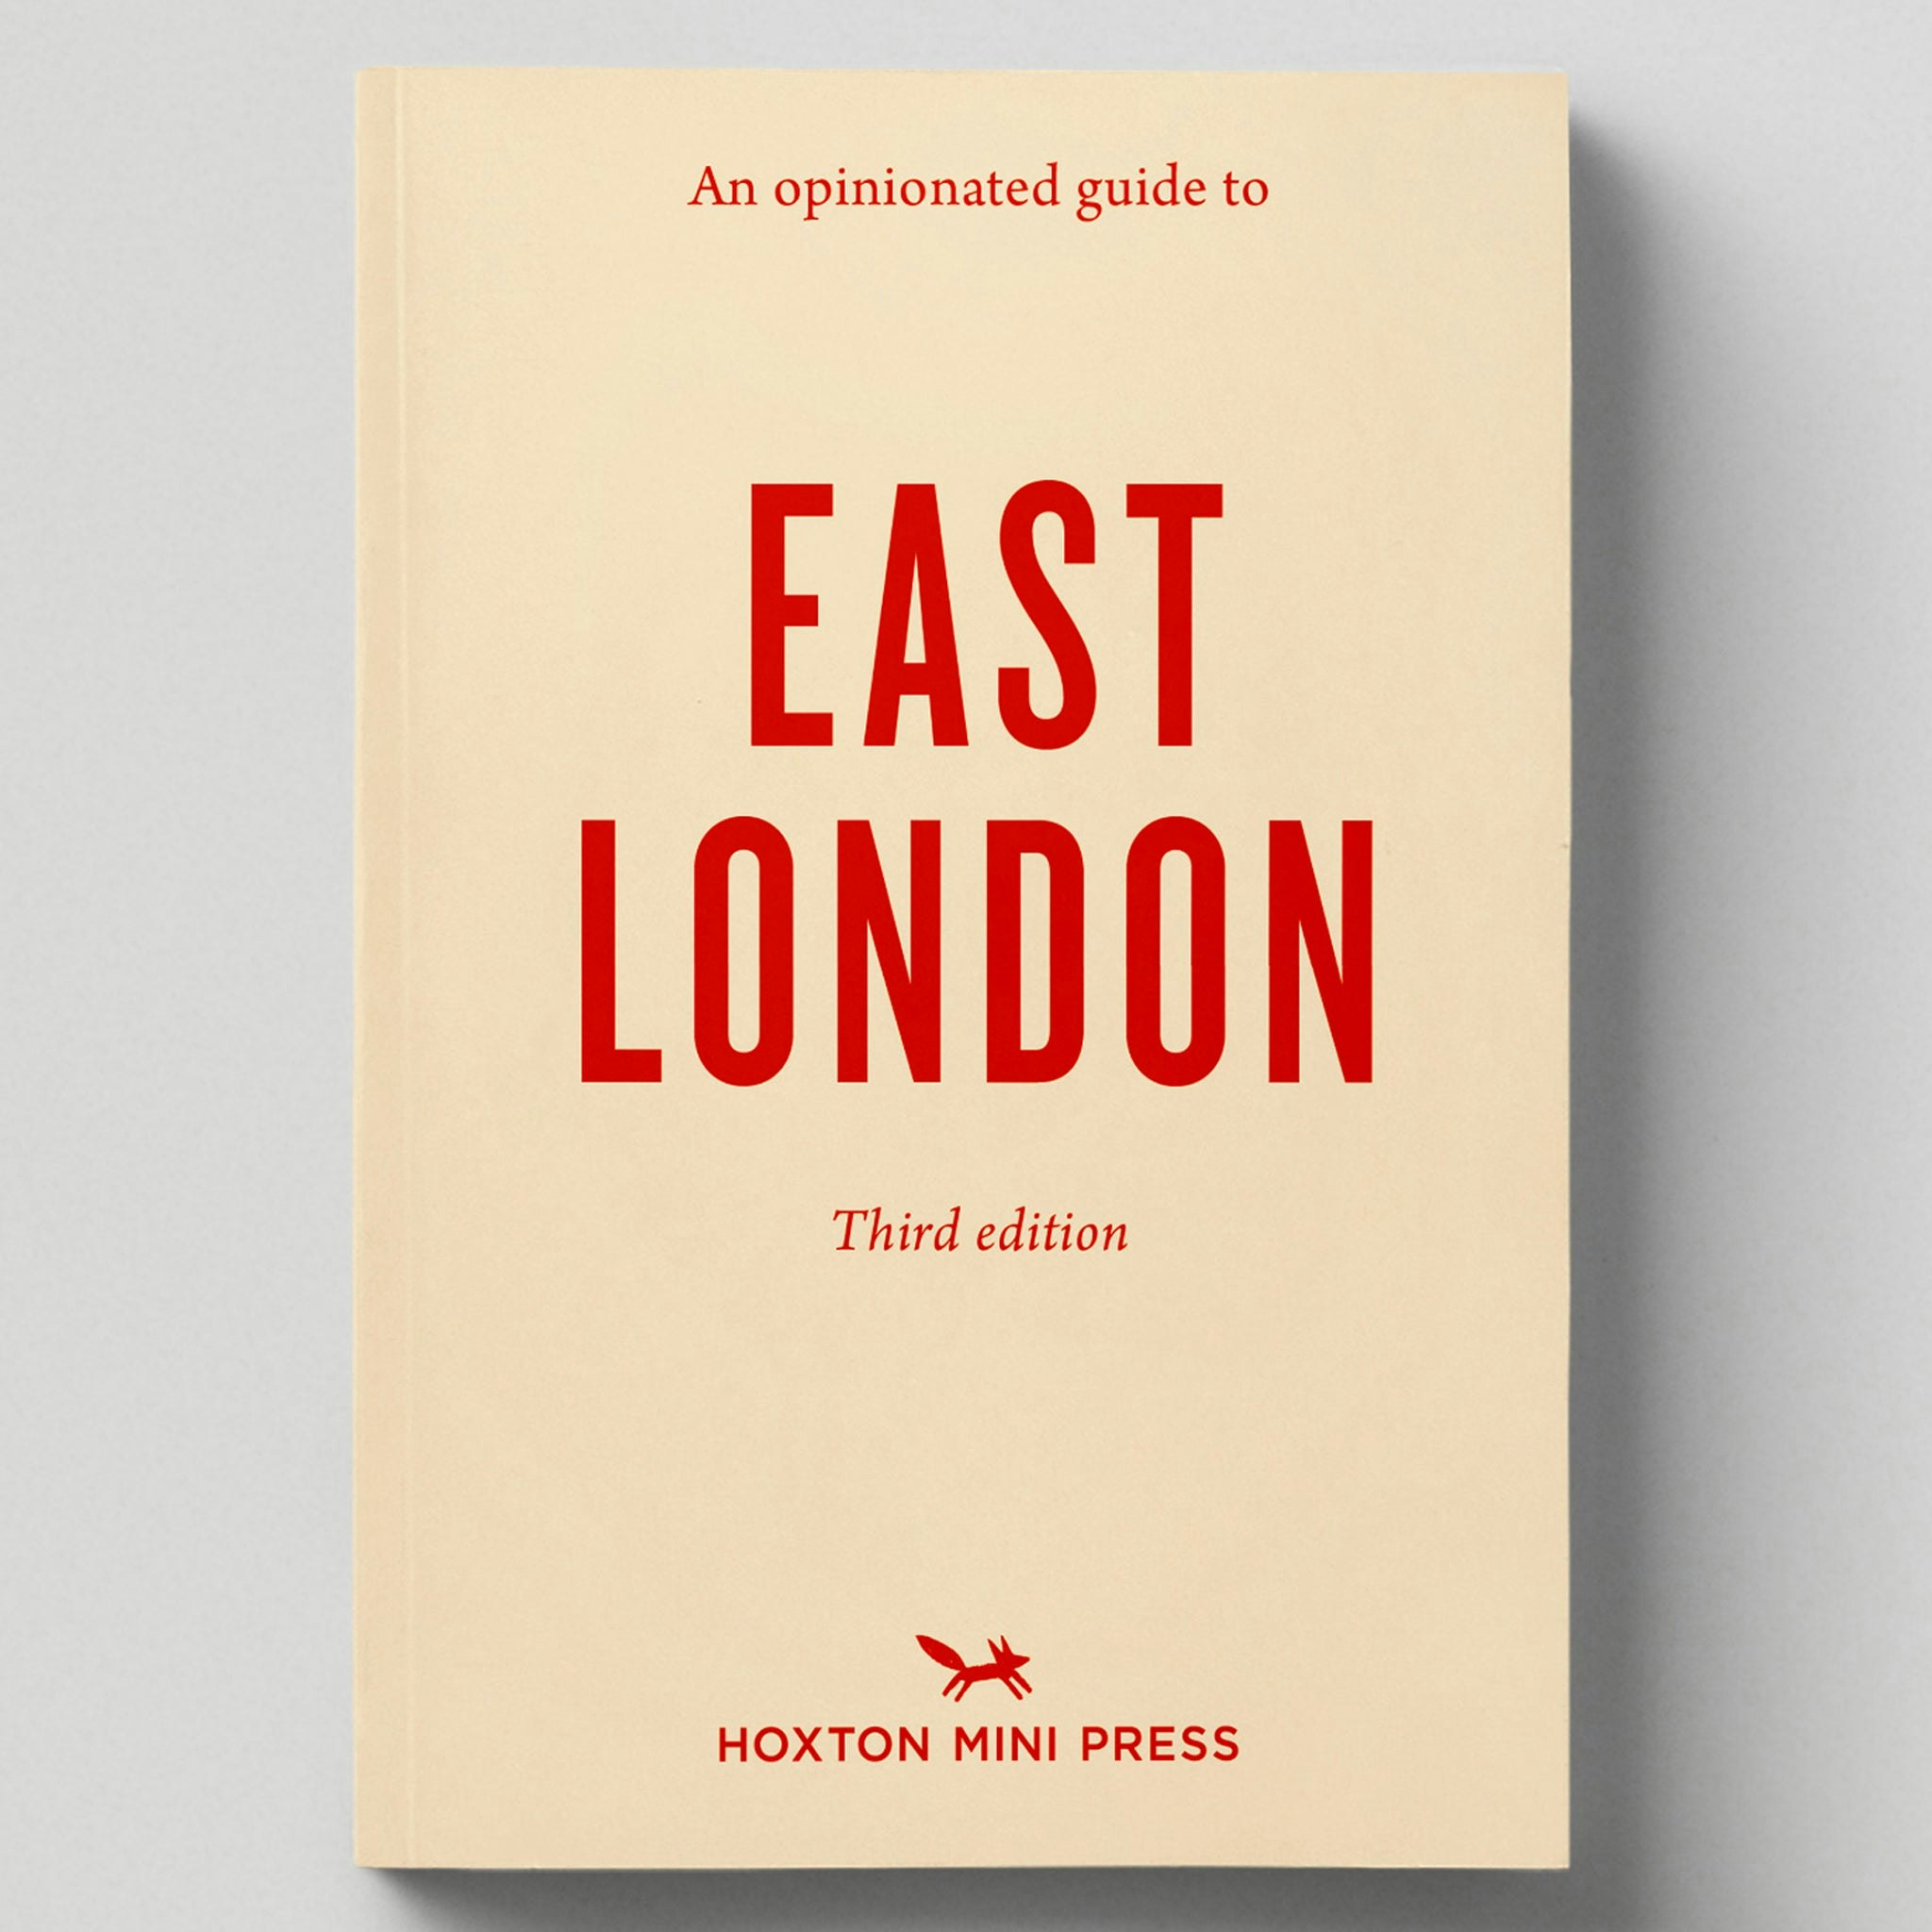 An Opinionated Guide to East London (Third Edition) by Hoxton Mini Press